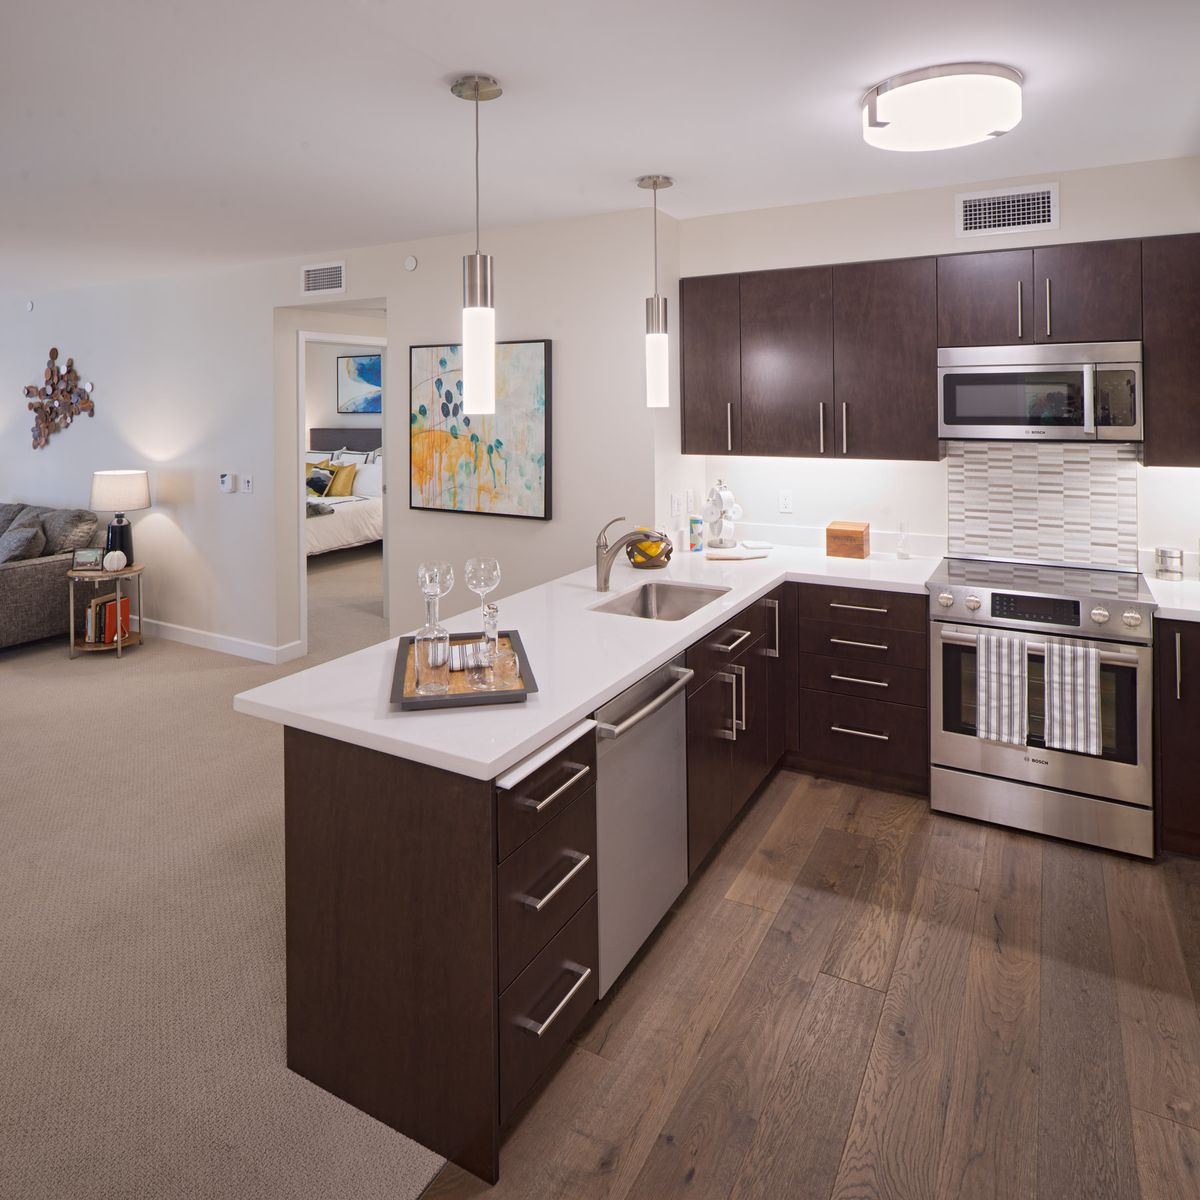 Interior view of Viamonte At Walnut Creek senior living community featuring a modern kitchen and furniture.